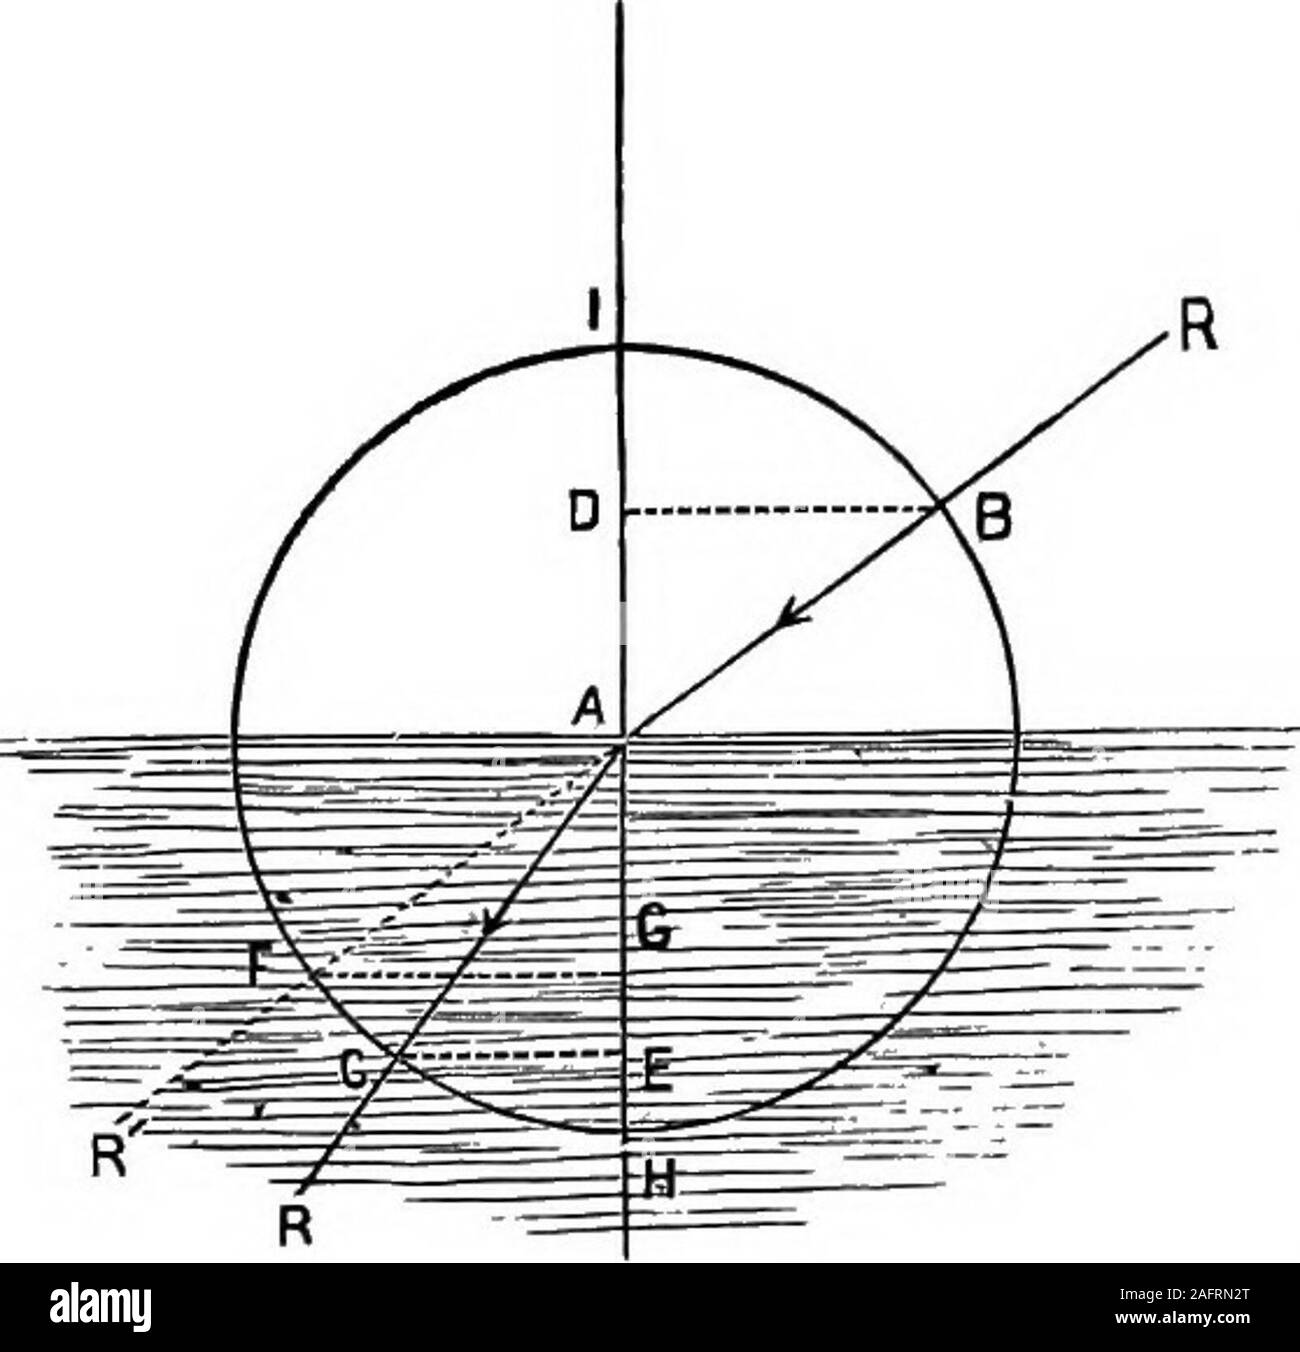 . The principles of physics. s zero when the incidentray is normal. It is highly important, knowing the angle ofincidence, to be able to determine the direction which a ray will take on entering a newmedium. Describe a circlearound the point of inci-dence A (Fig. 255) as acenter; through the samepoint draw IH perpendicu-lar to the surfaces of thetwo mediums, and to ttiisline drop perpendicularsB D and C E from the pointswhere the circle cuts theray in the two mediums.Then suppose that the per-pendicular B D is y% of the radius AB ; now this fraction?^f^ is called (in trigonometry) the sine of Stock Photo